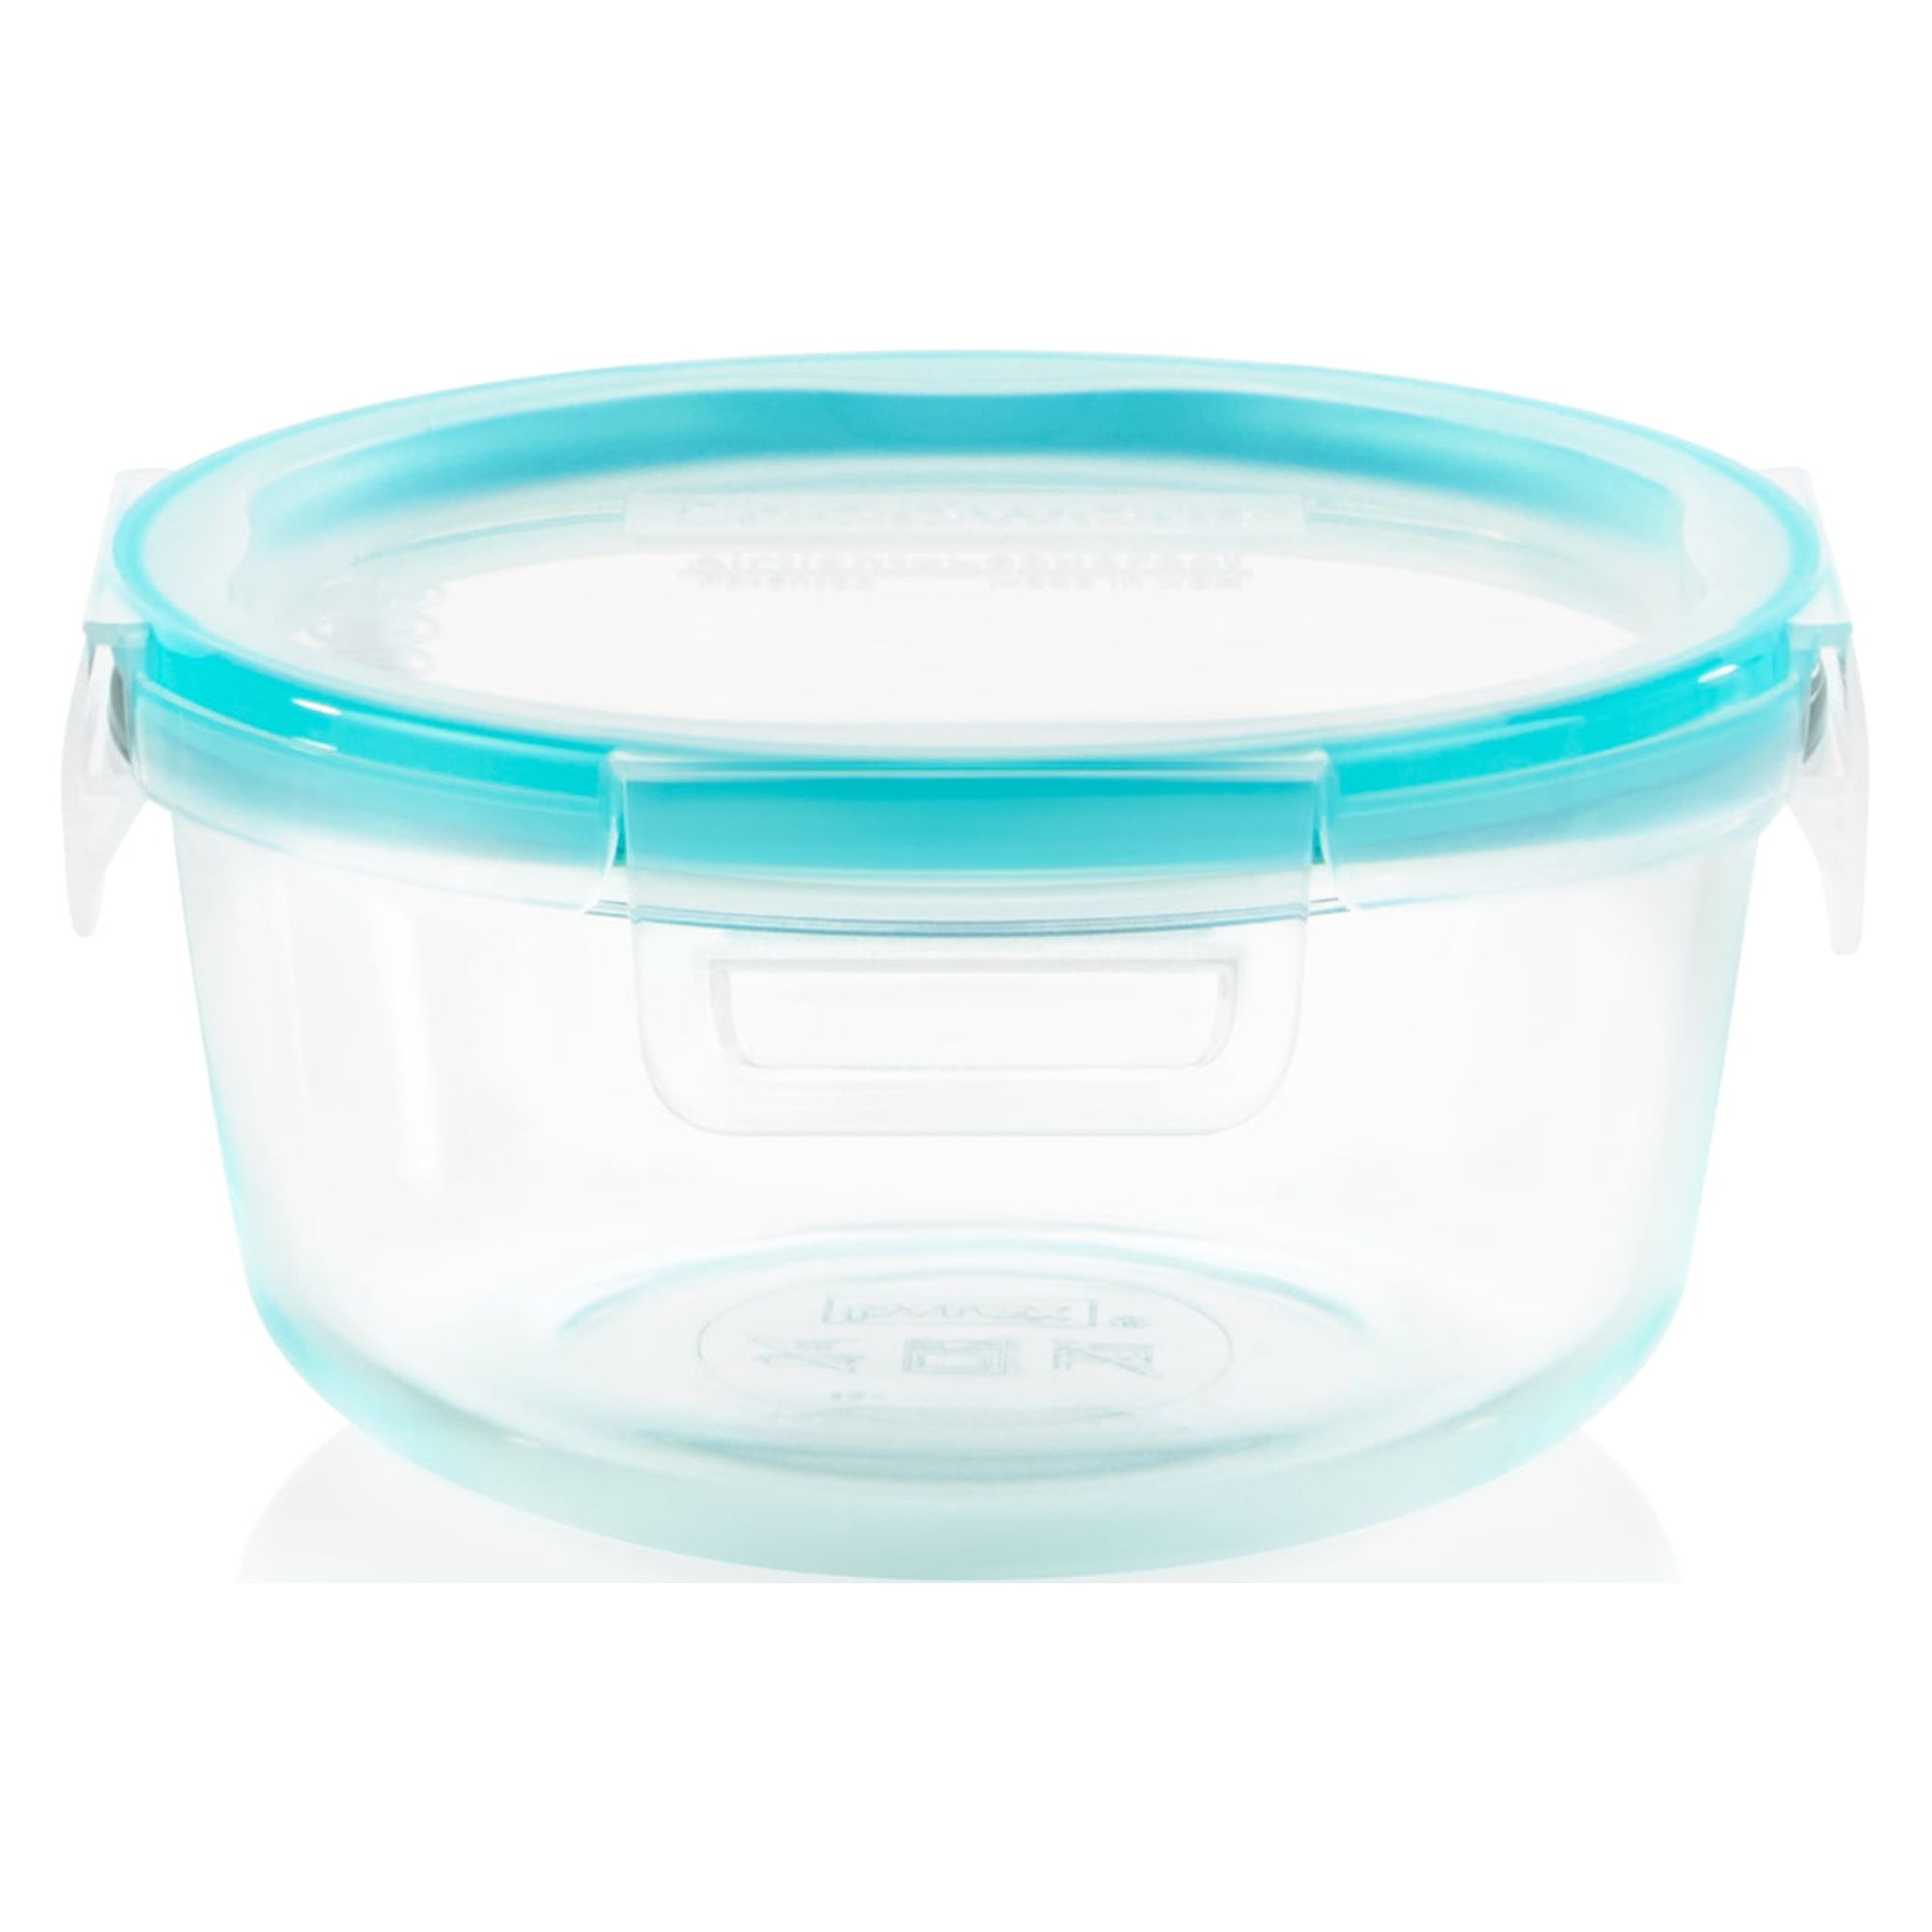 Snapware Total Solution Glass Food Storage with Lid, 4 Cups - image 1 of 12